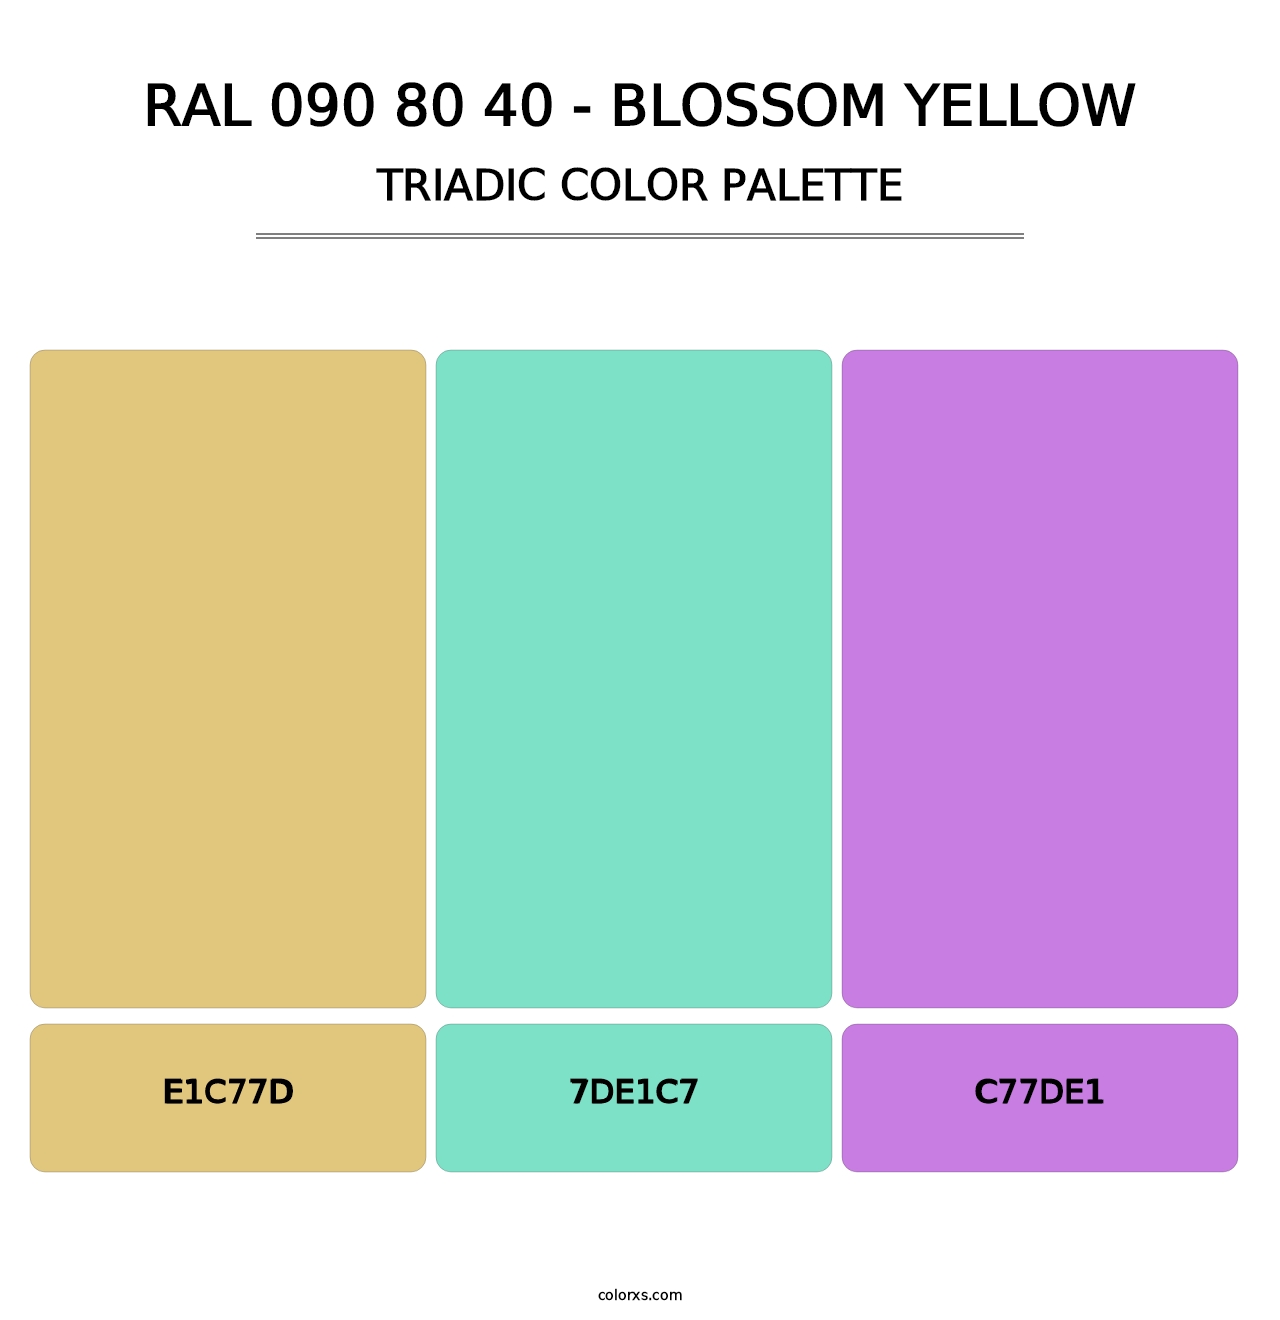 RAL 090 80 40 - Blossom Yellow - Triadic Color Palette